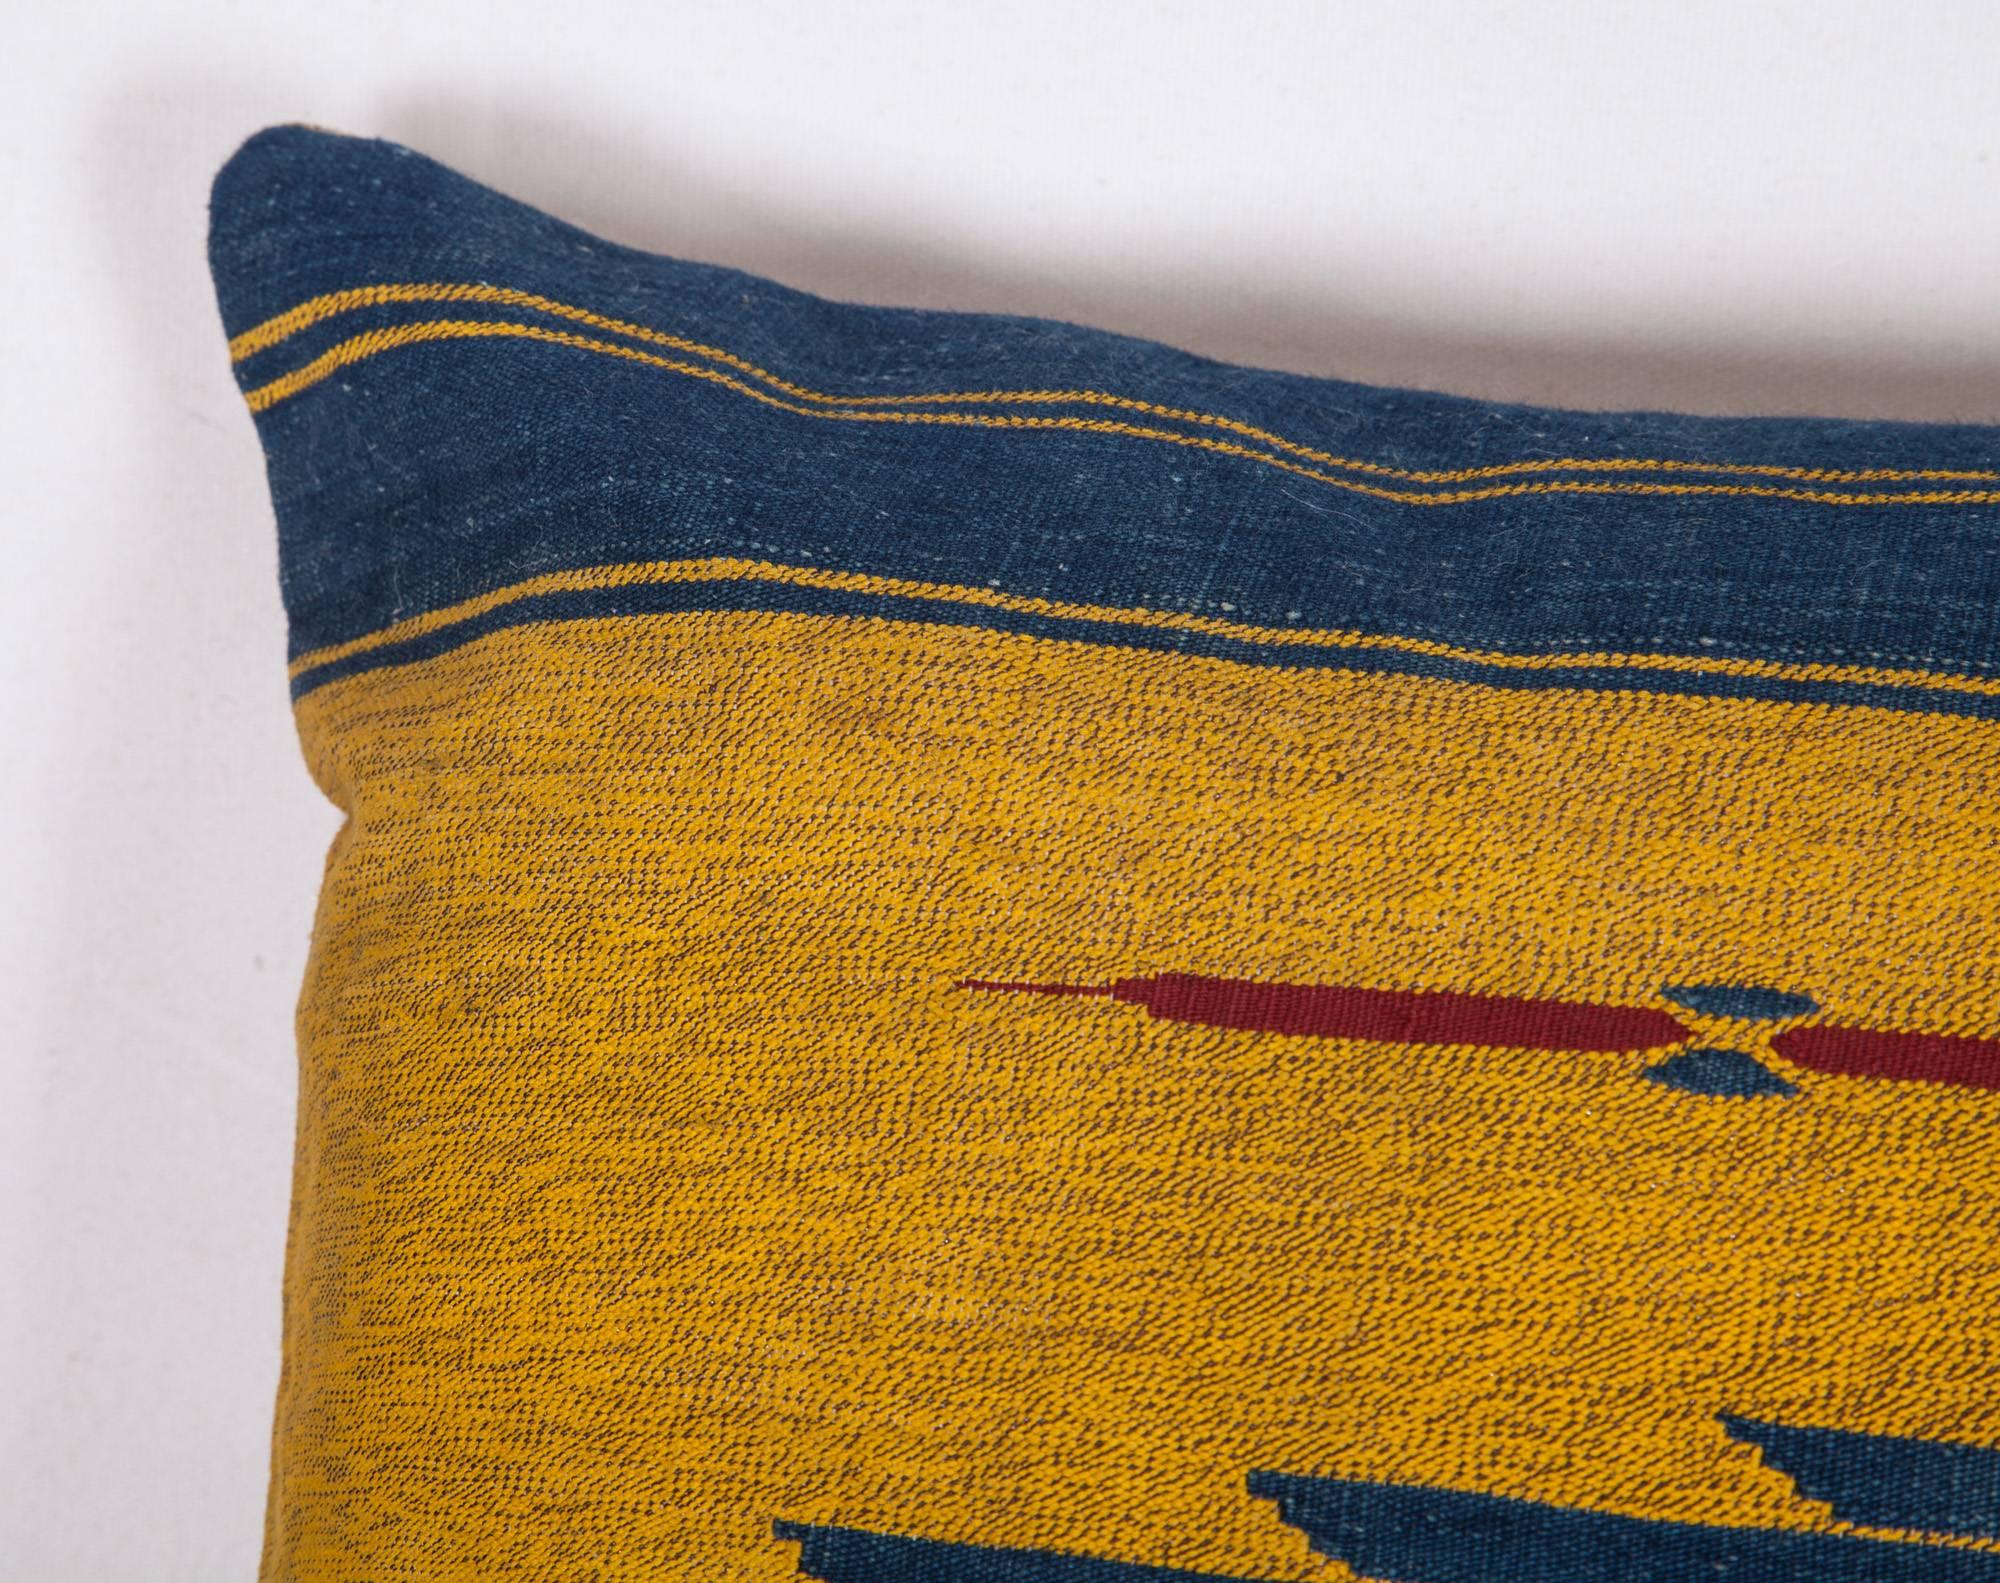 Kilim Antique Pillow from Middle Eastern Textile